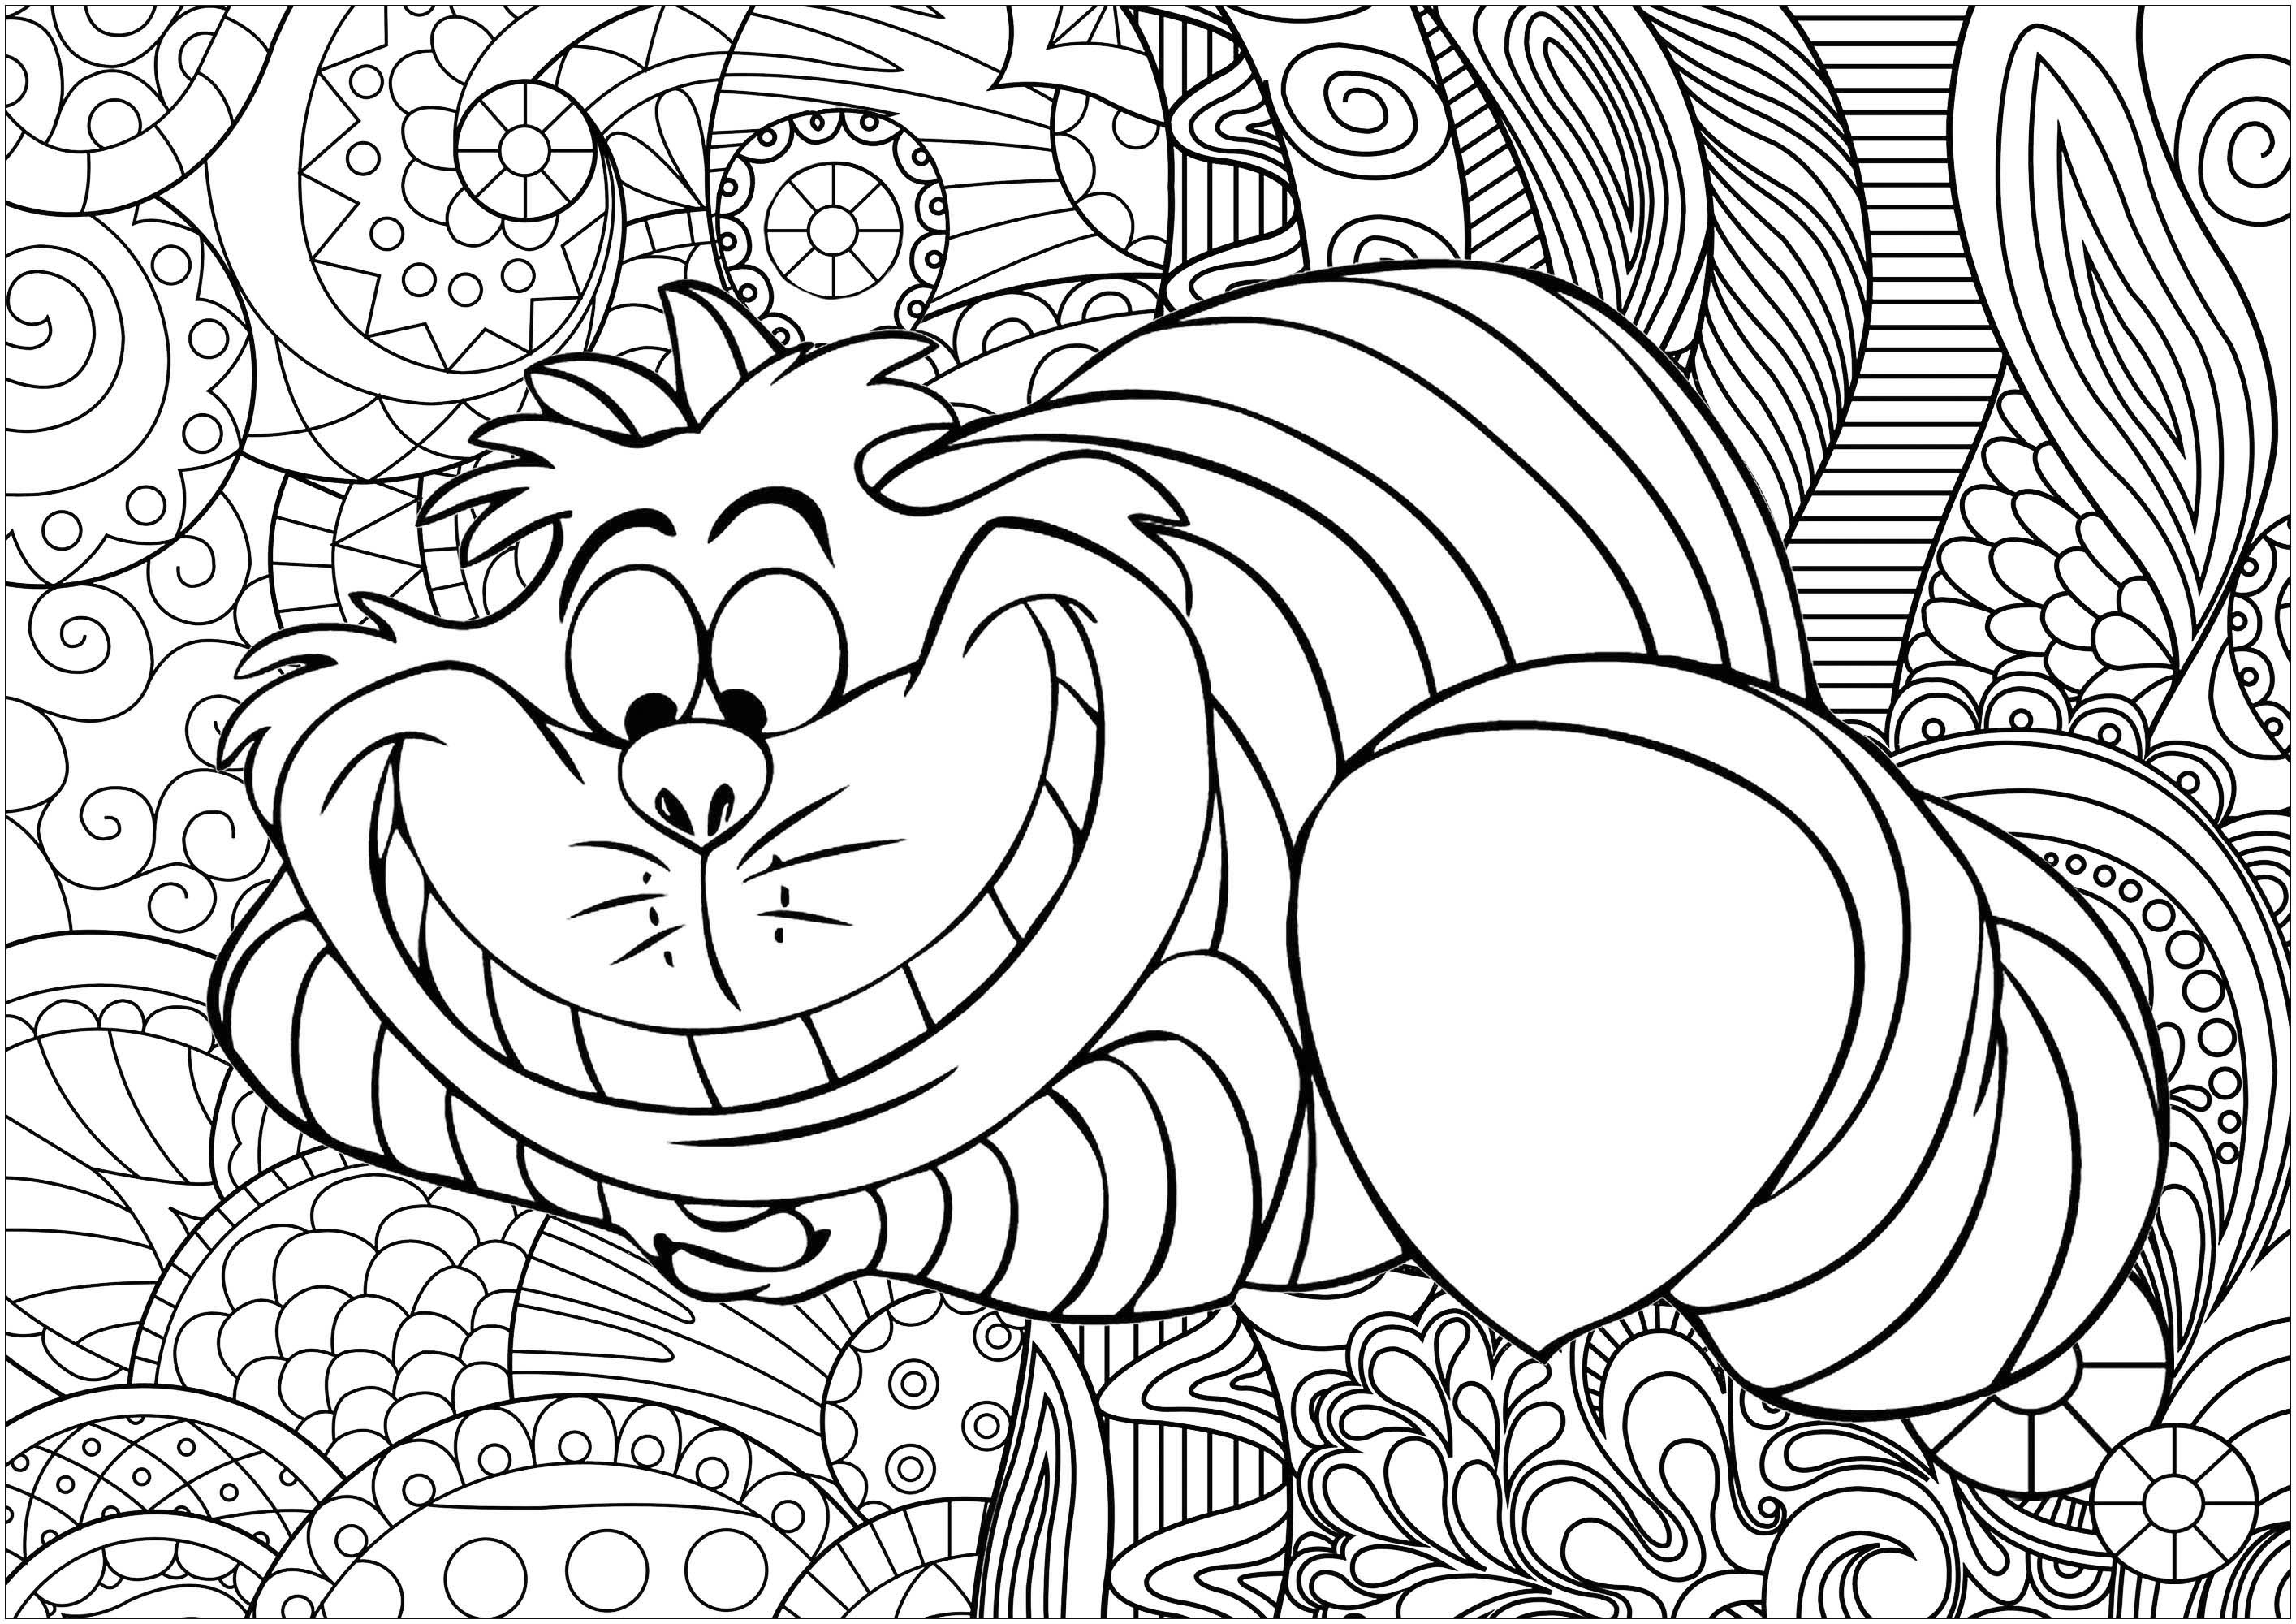 Cheshire cat with patterns in background   Cats Adult Coloring Pages